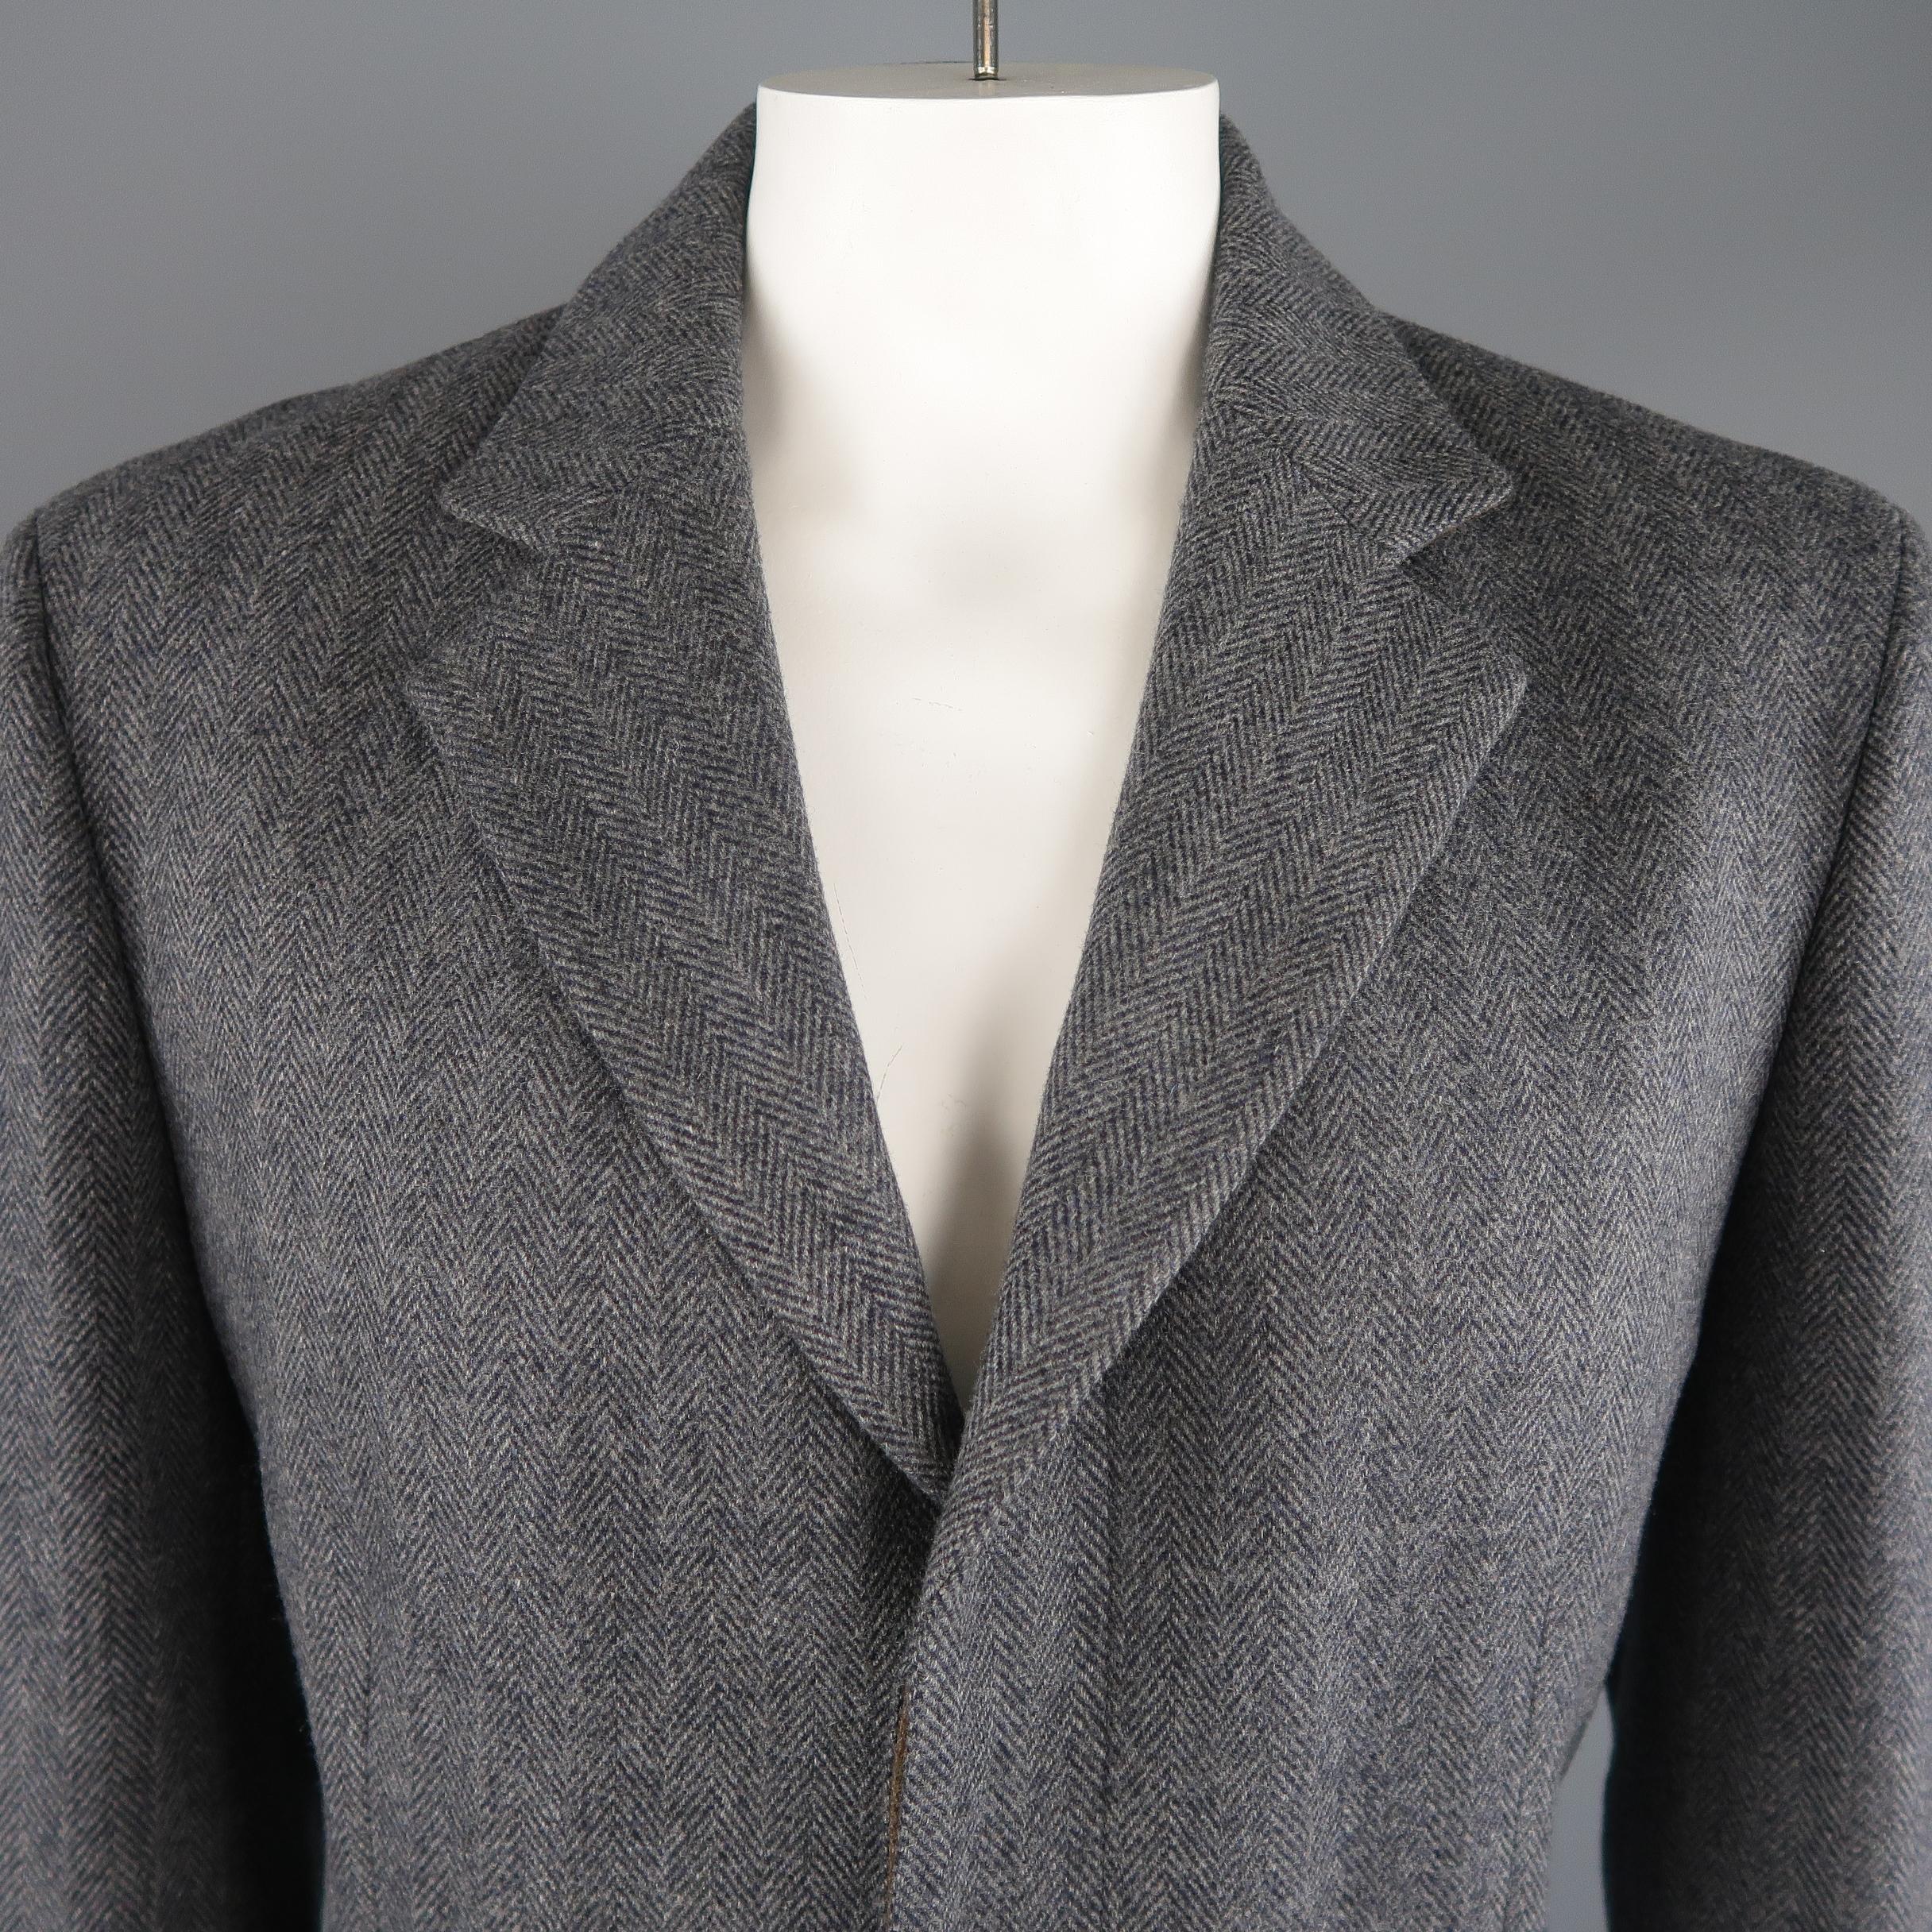 ELIE TAHARI over coat comes in herringbone wool cashmere blend fabric with a notch lapel, hidden placket button closure, flap pockets, and half liner. Slit stitches still intact. Never worn. Made in Italy.
 
Excellent Pre-Owned Condition.
Marked: L
